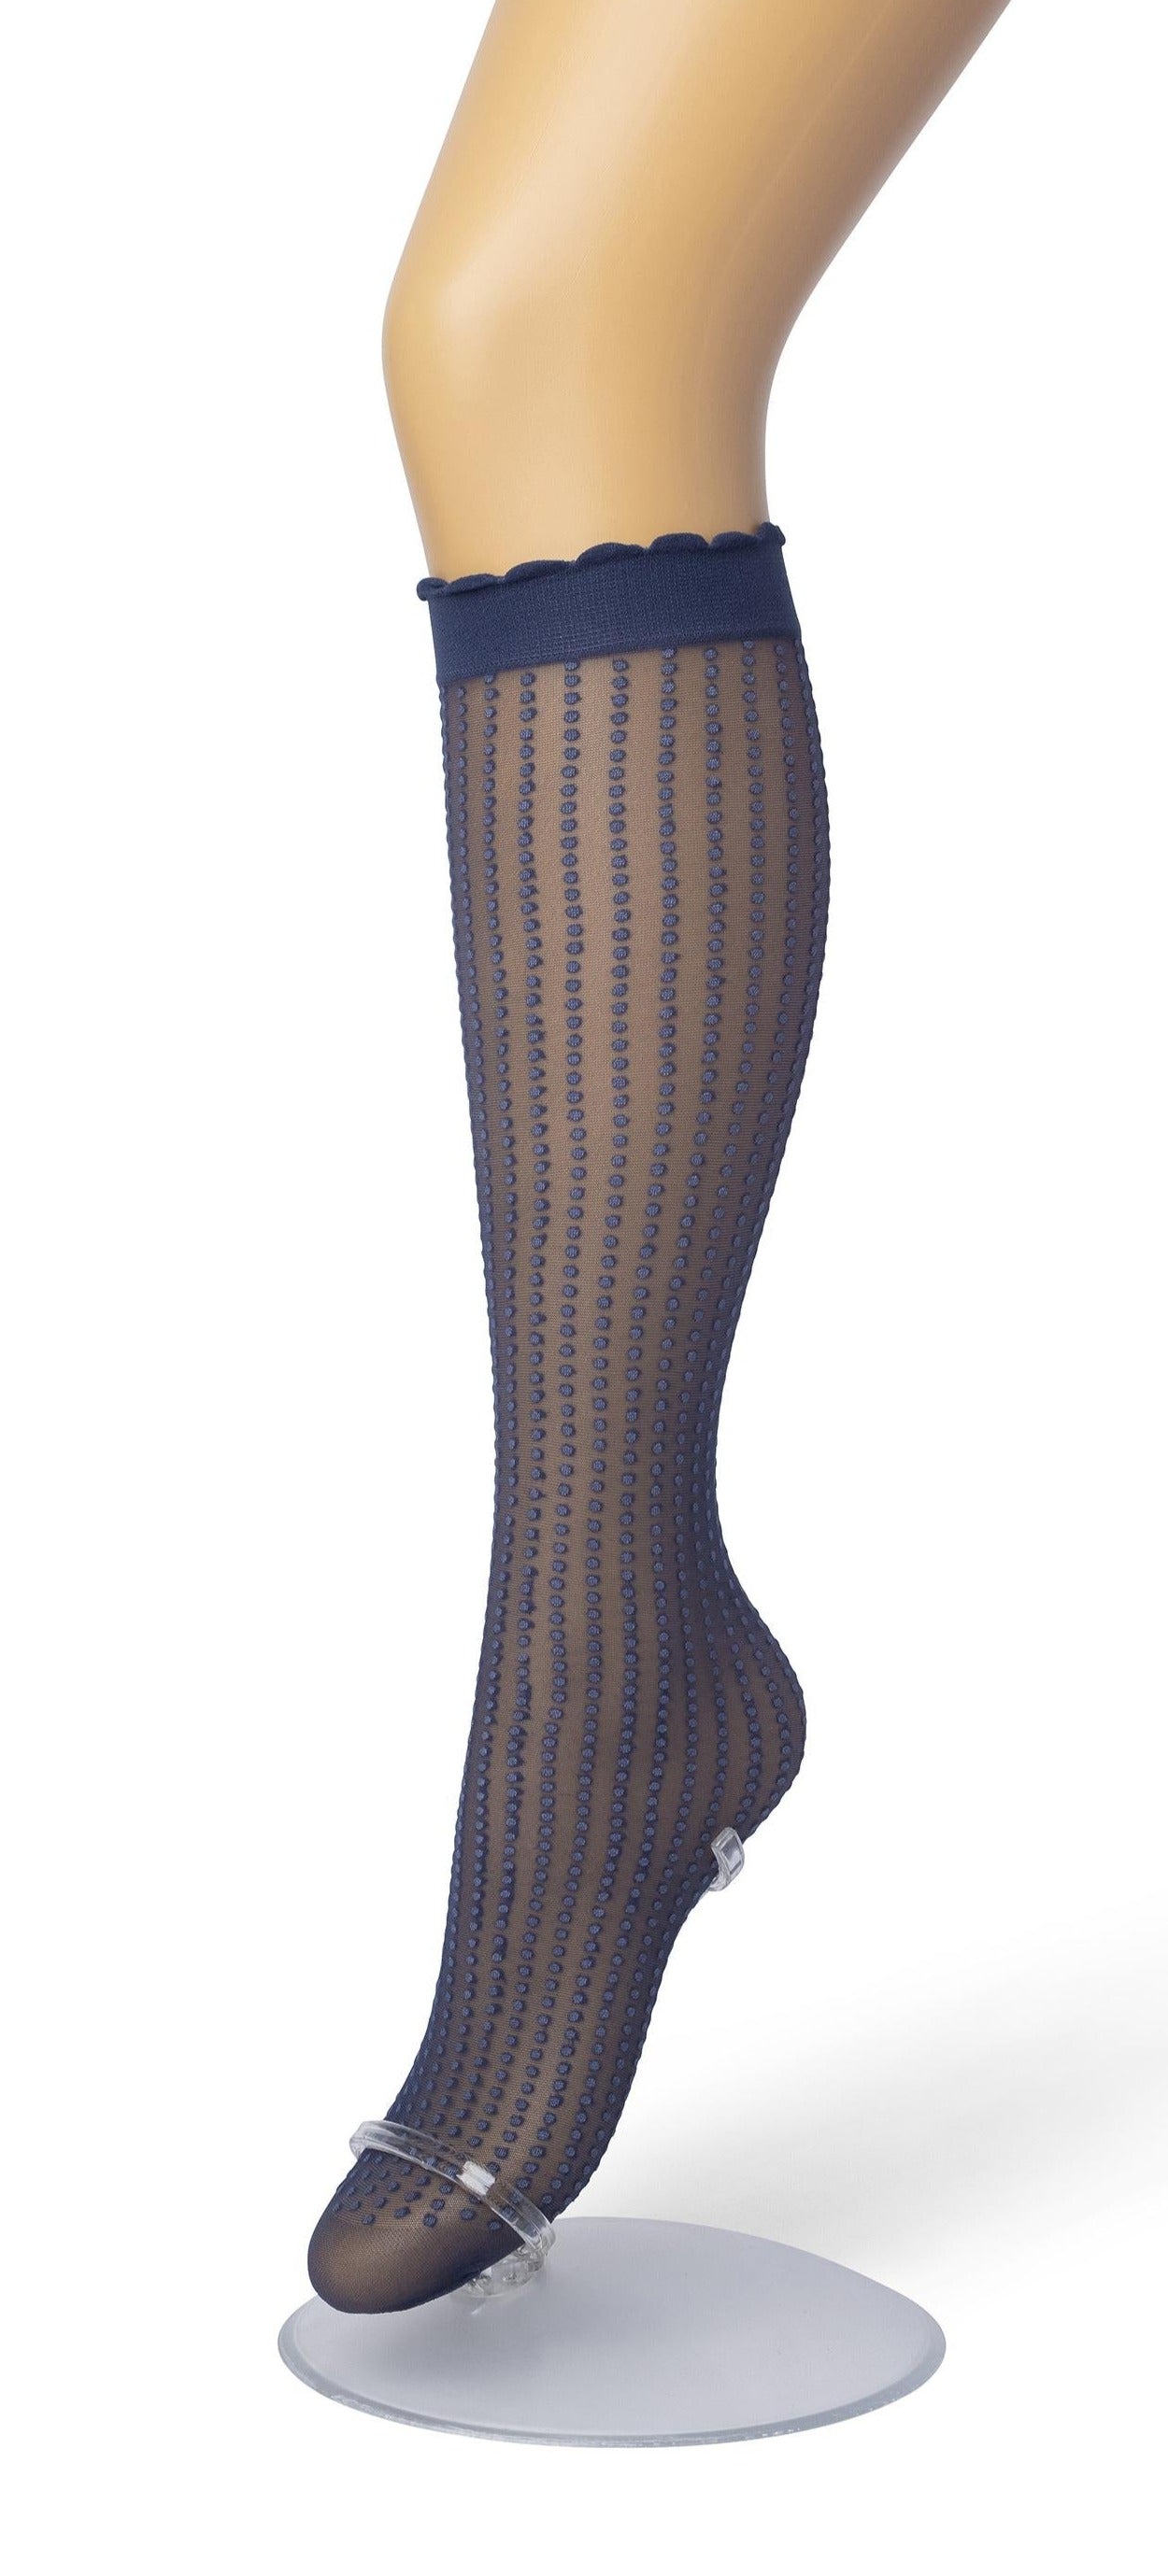 Bonnie Doon Batik Dots - Navy (black iris) sheer fashion knee-high socks with a dotted vertical stripe pattern, deep comfort cuff with scalloped edge.